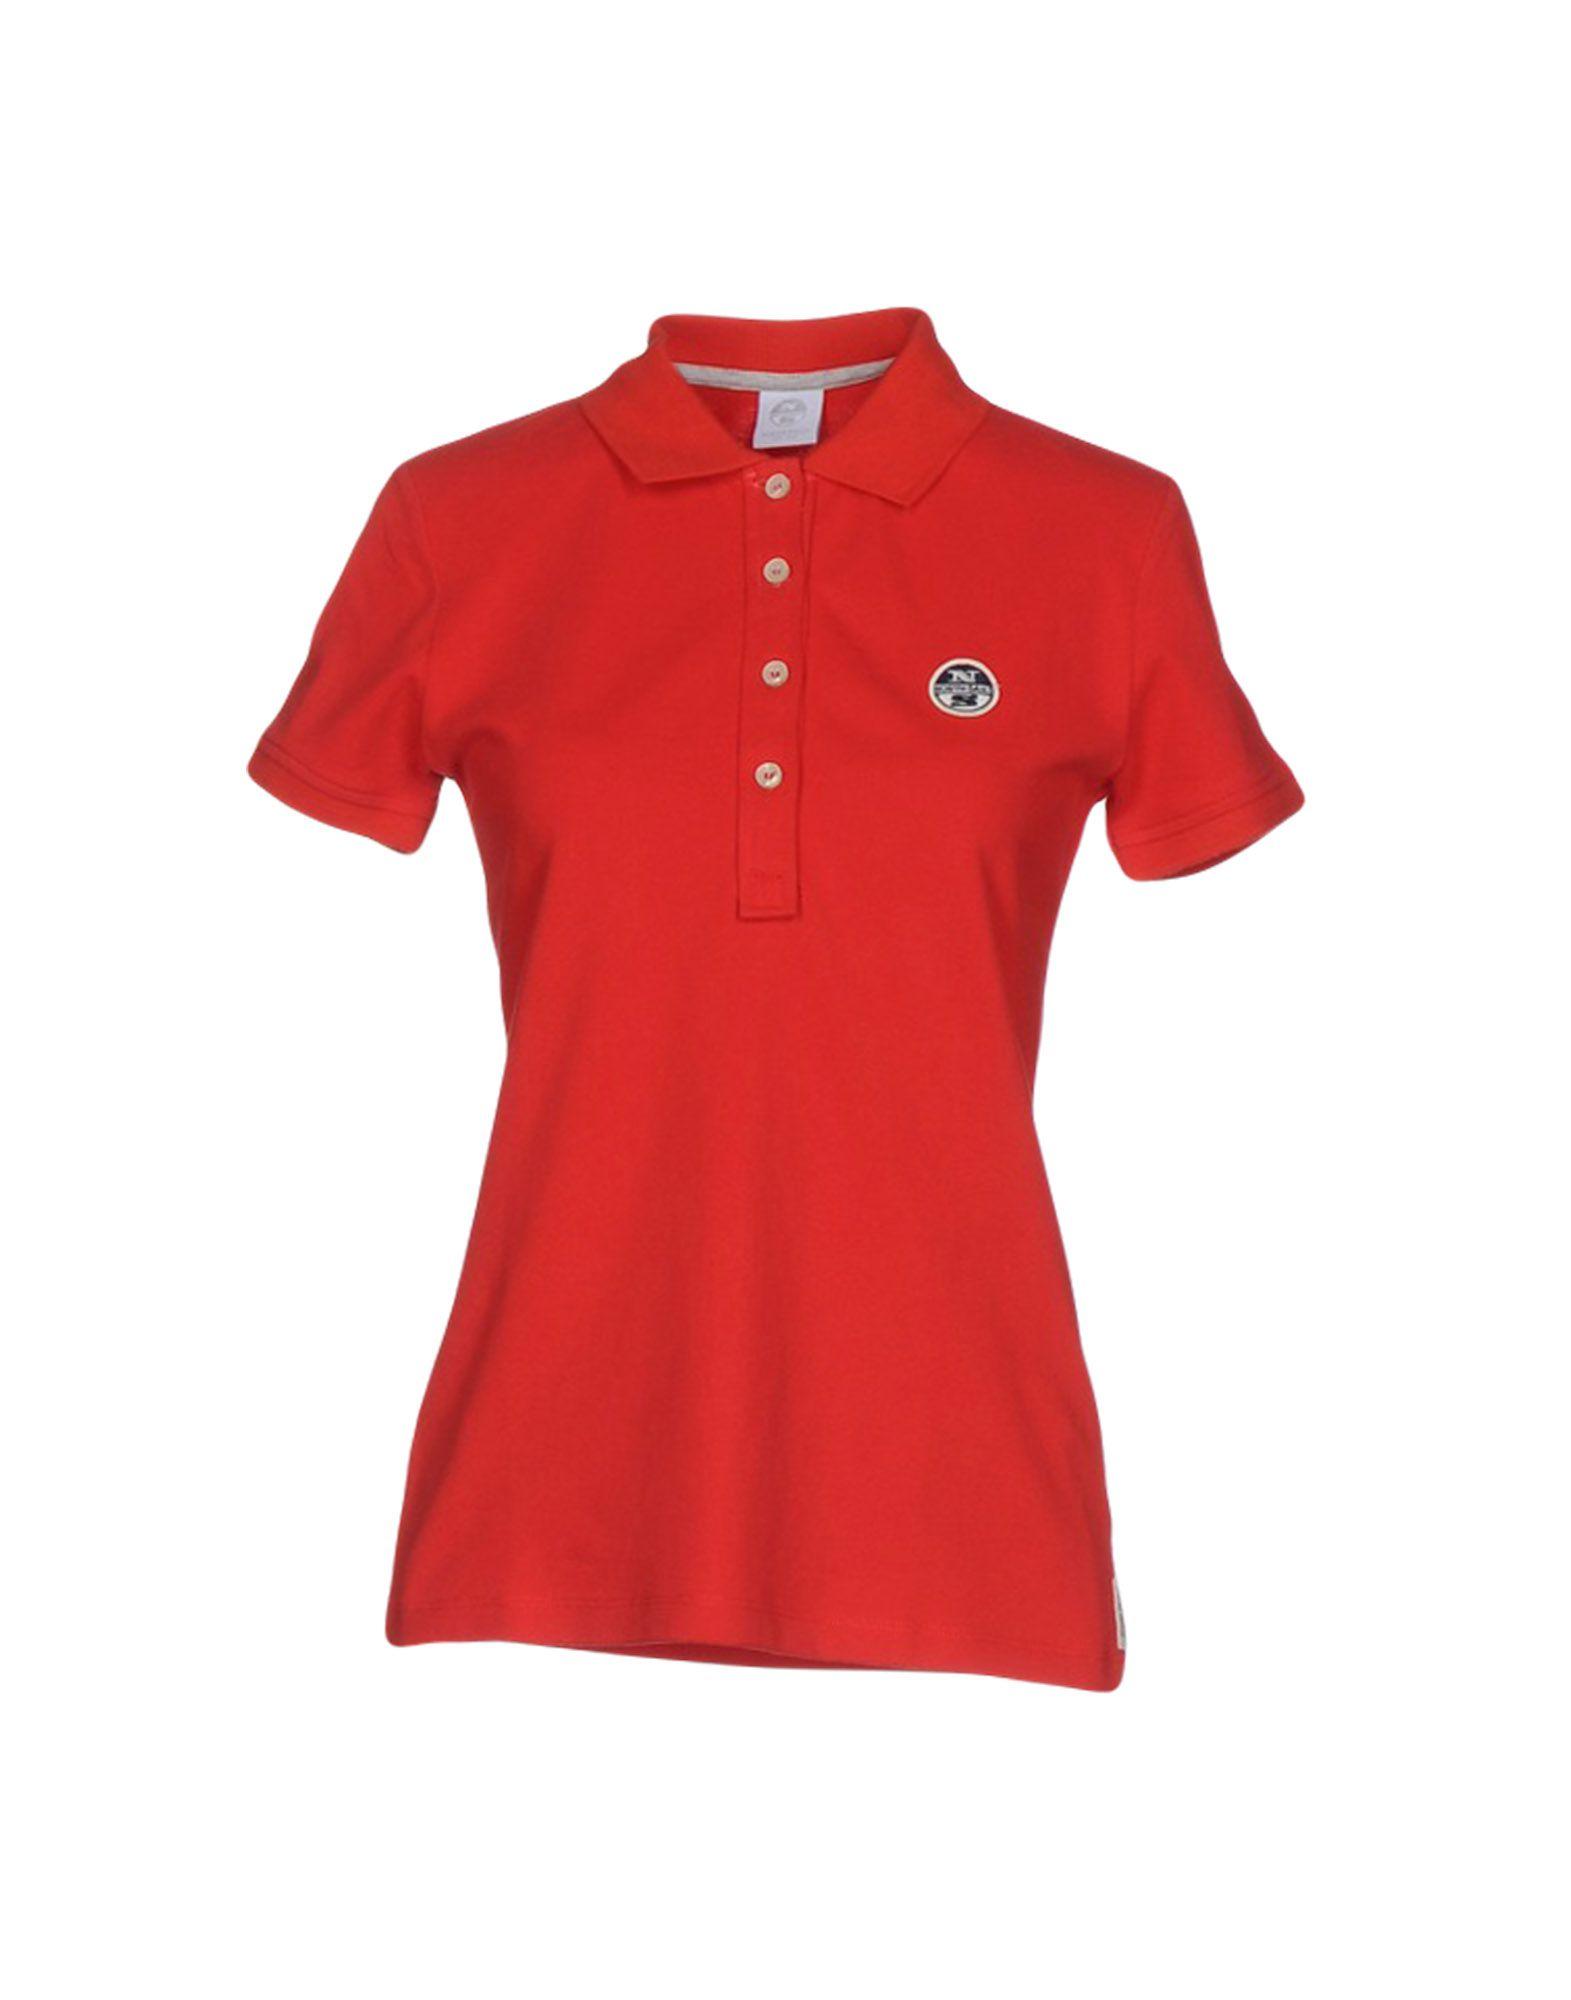 Lyst - North Sails Polo Shirt in Red